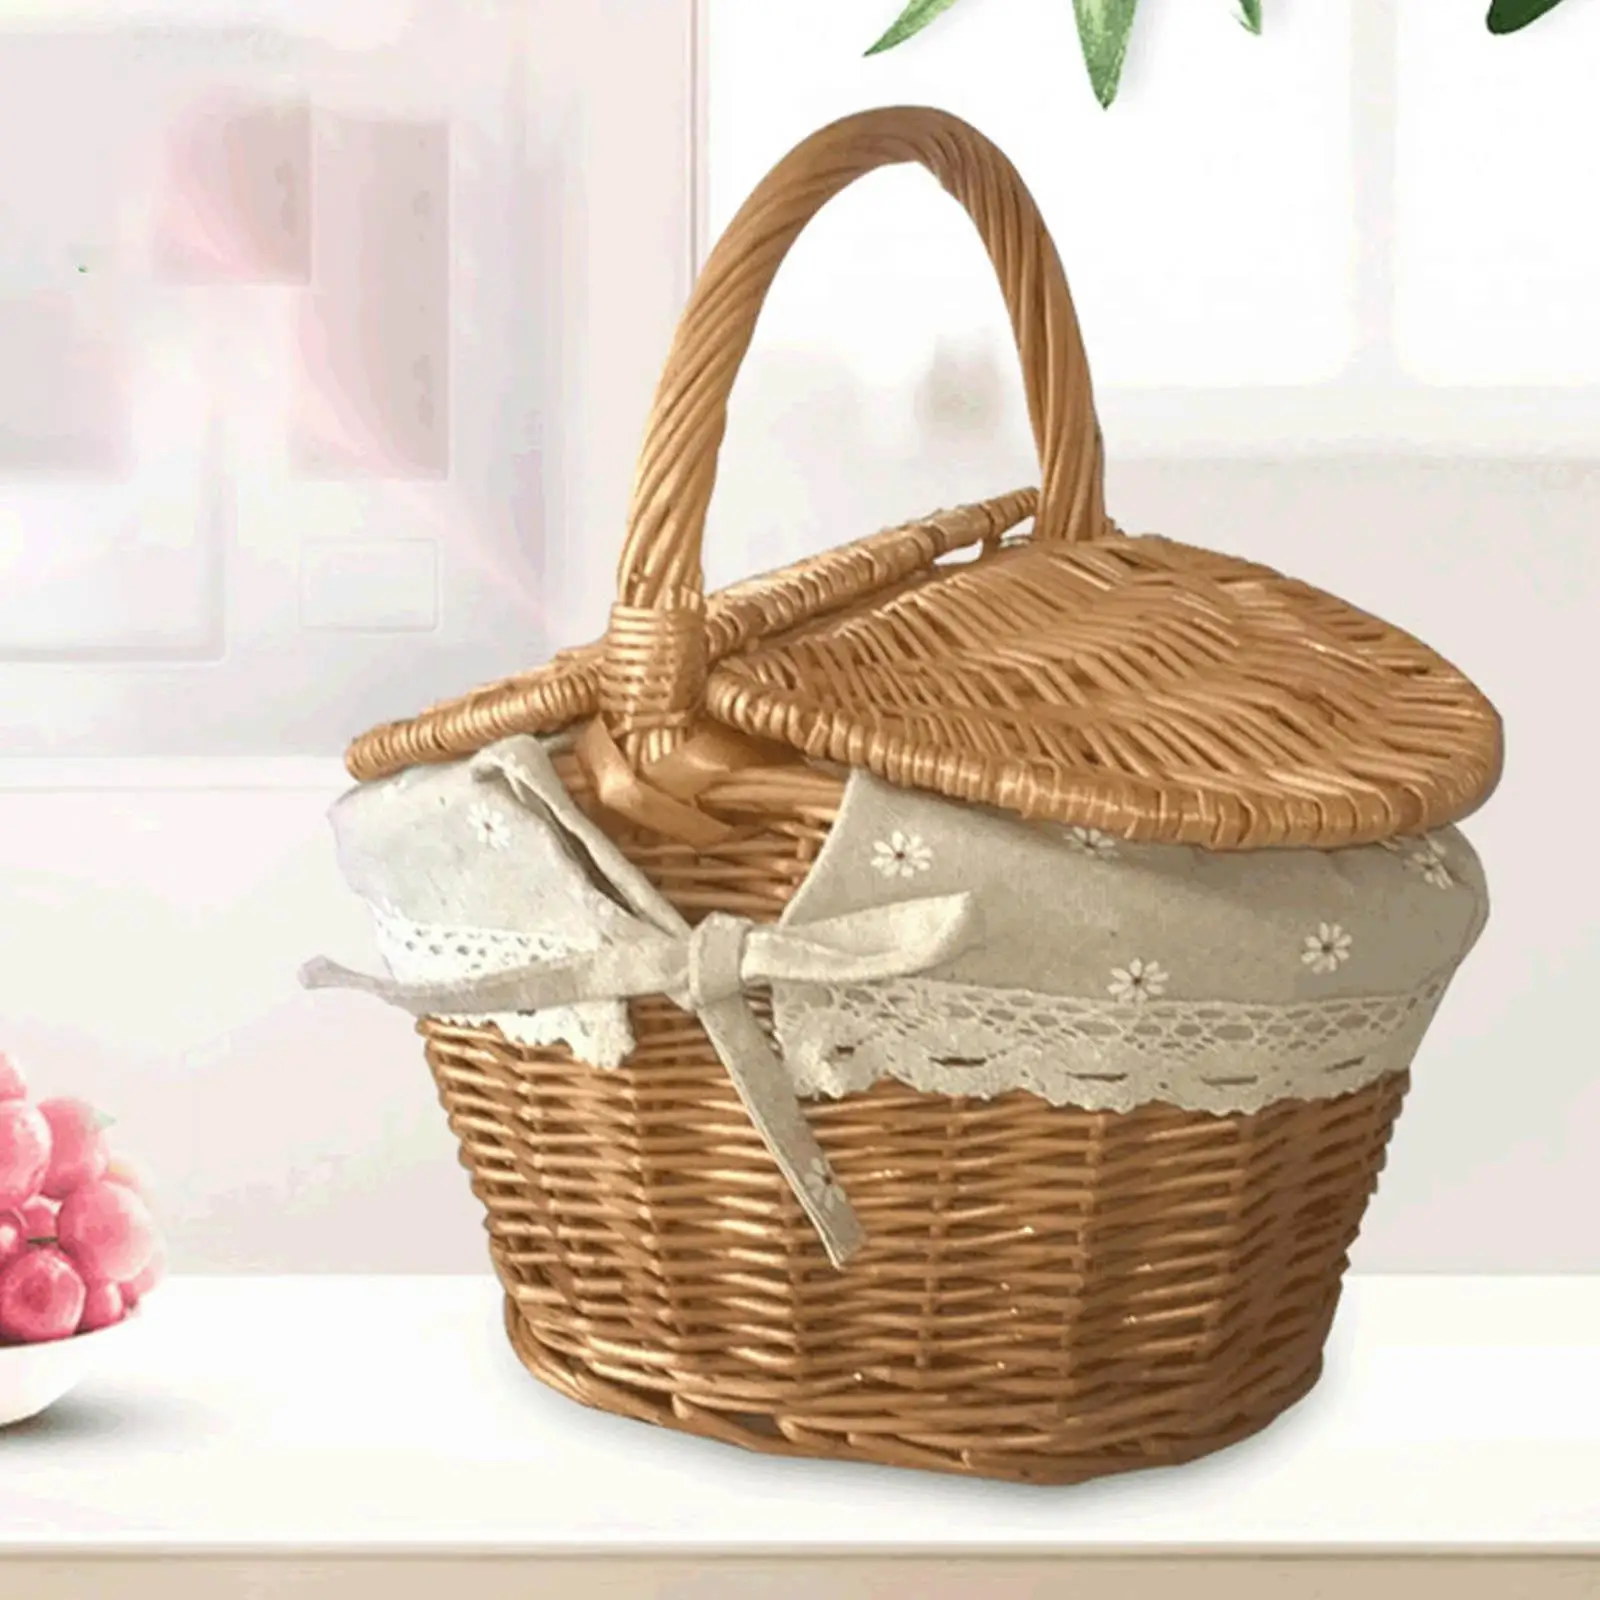 Handwoven Wicker Picnic Basket with Lid and Handle for Chips Fruits Bread